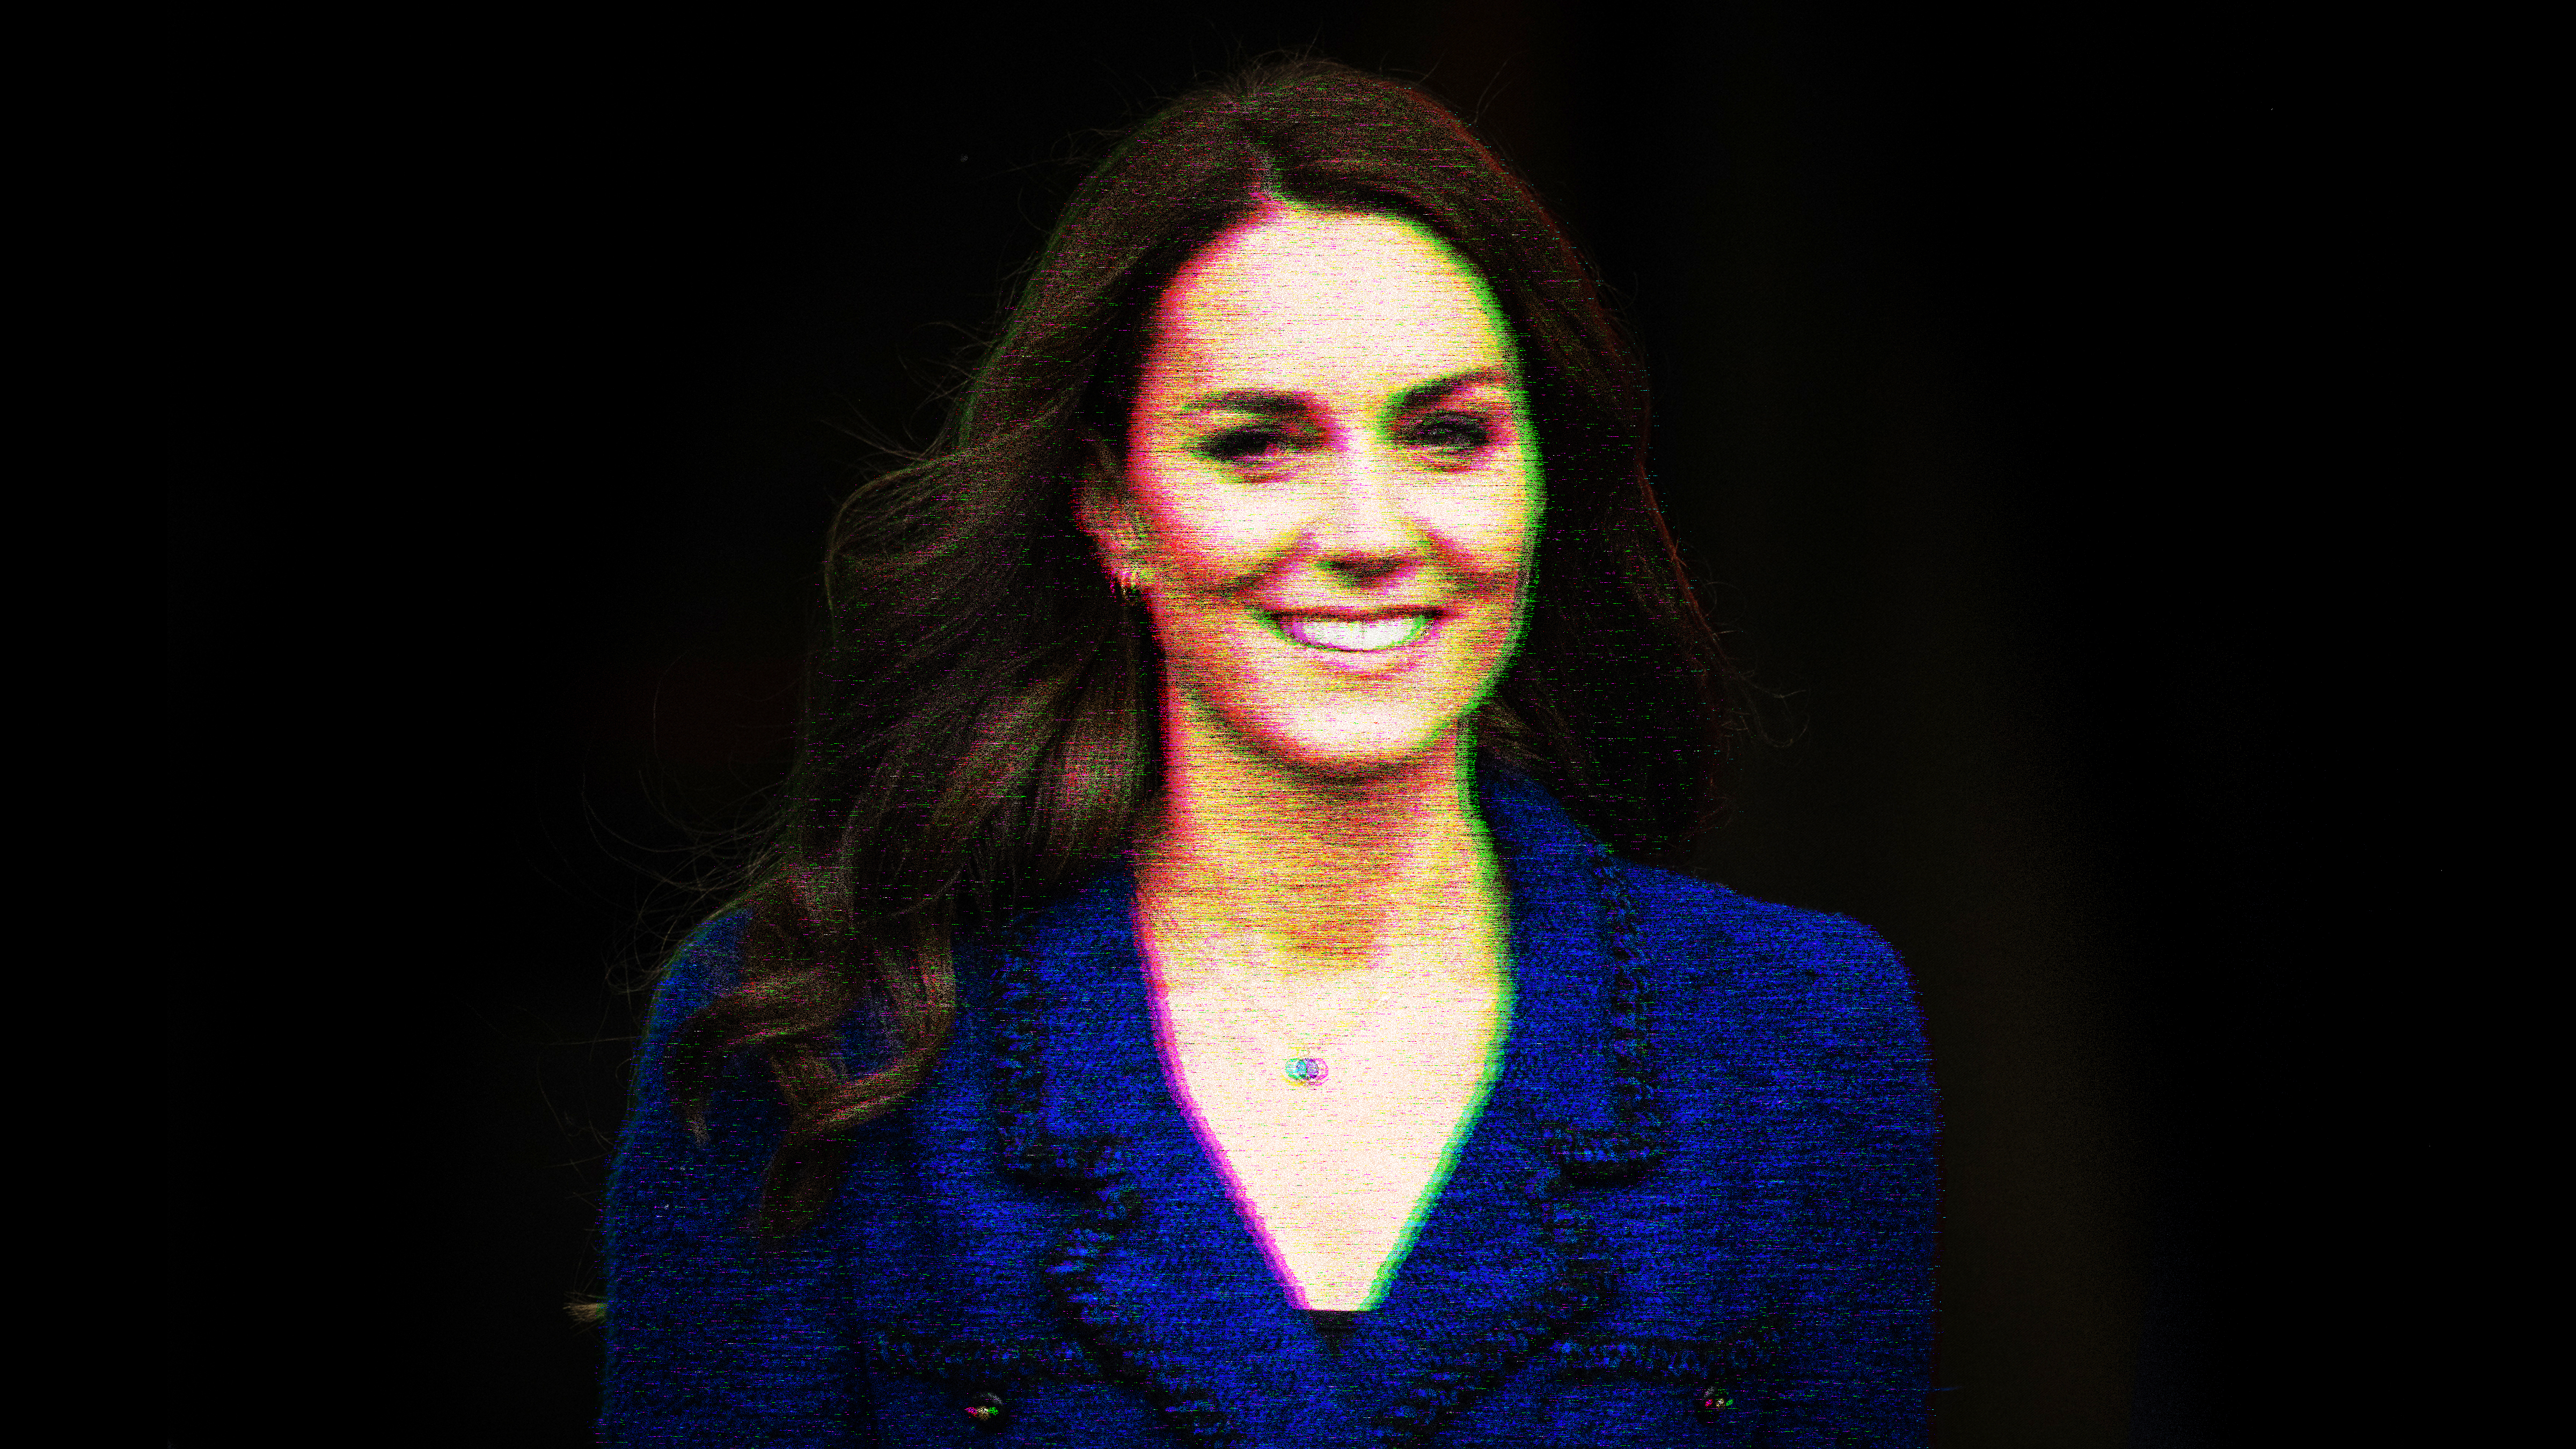 A blurry photo of Kate Middleton